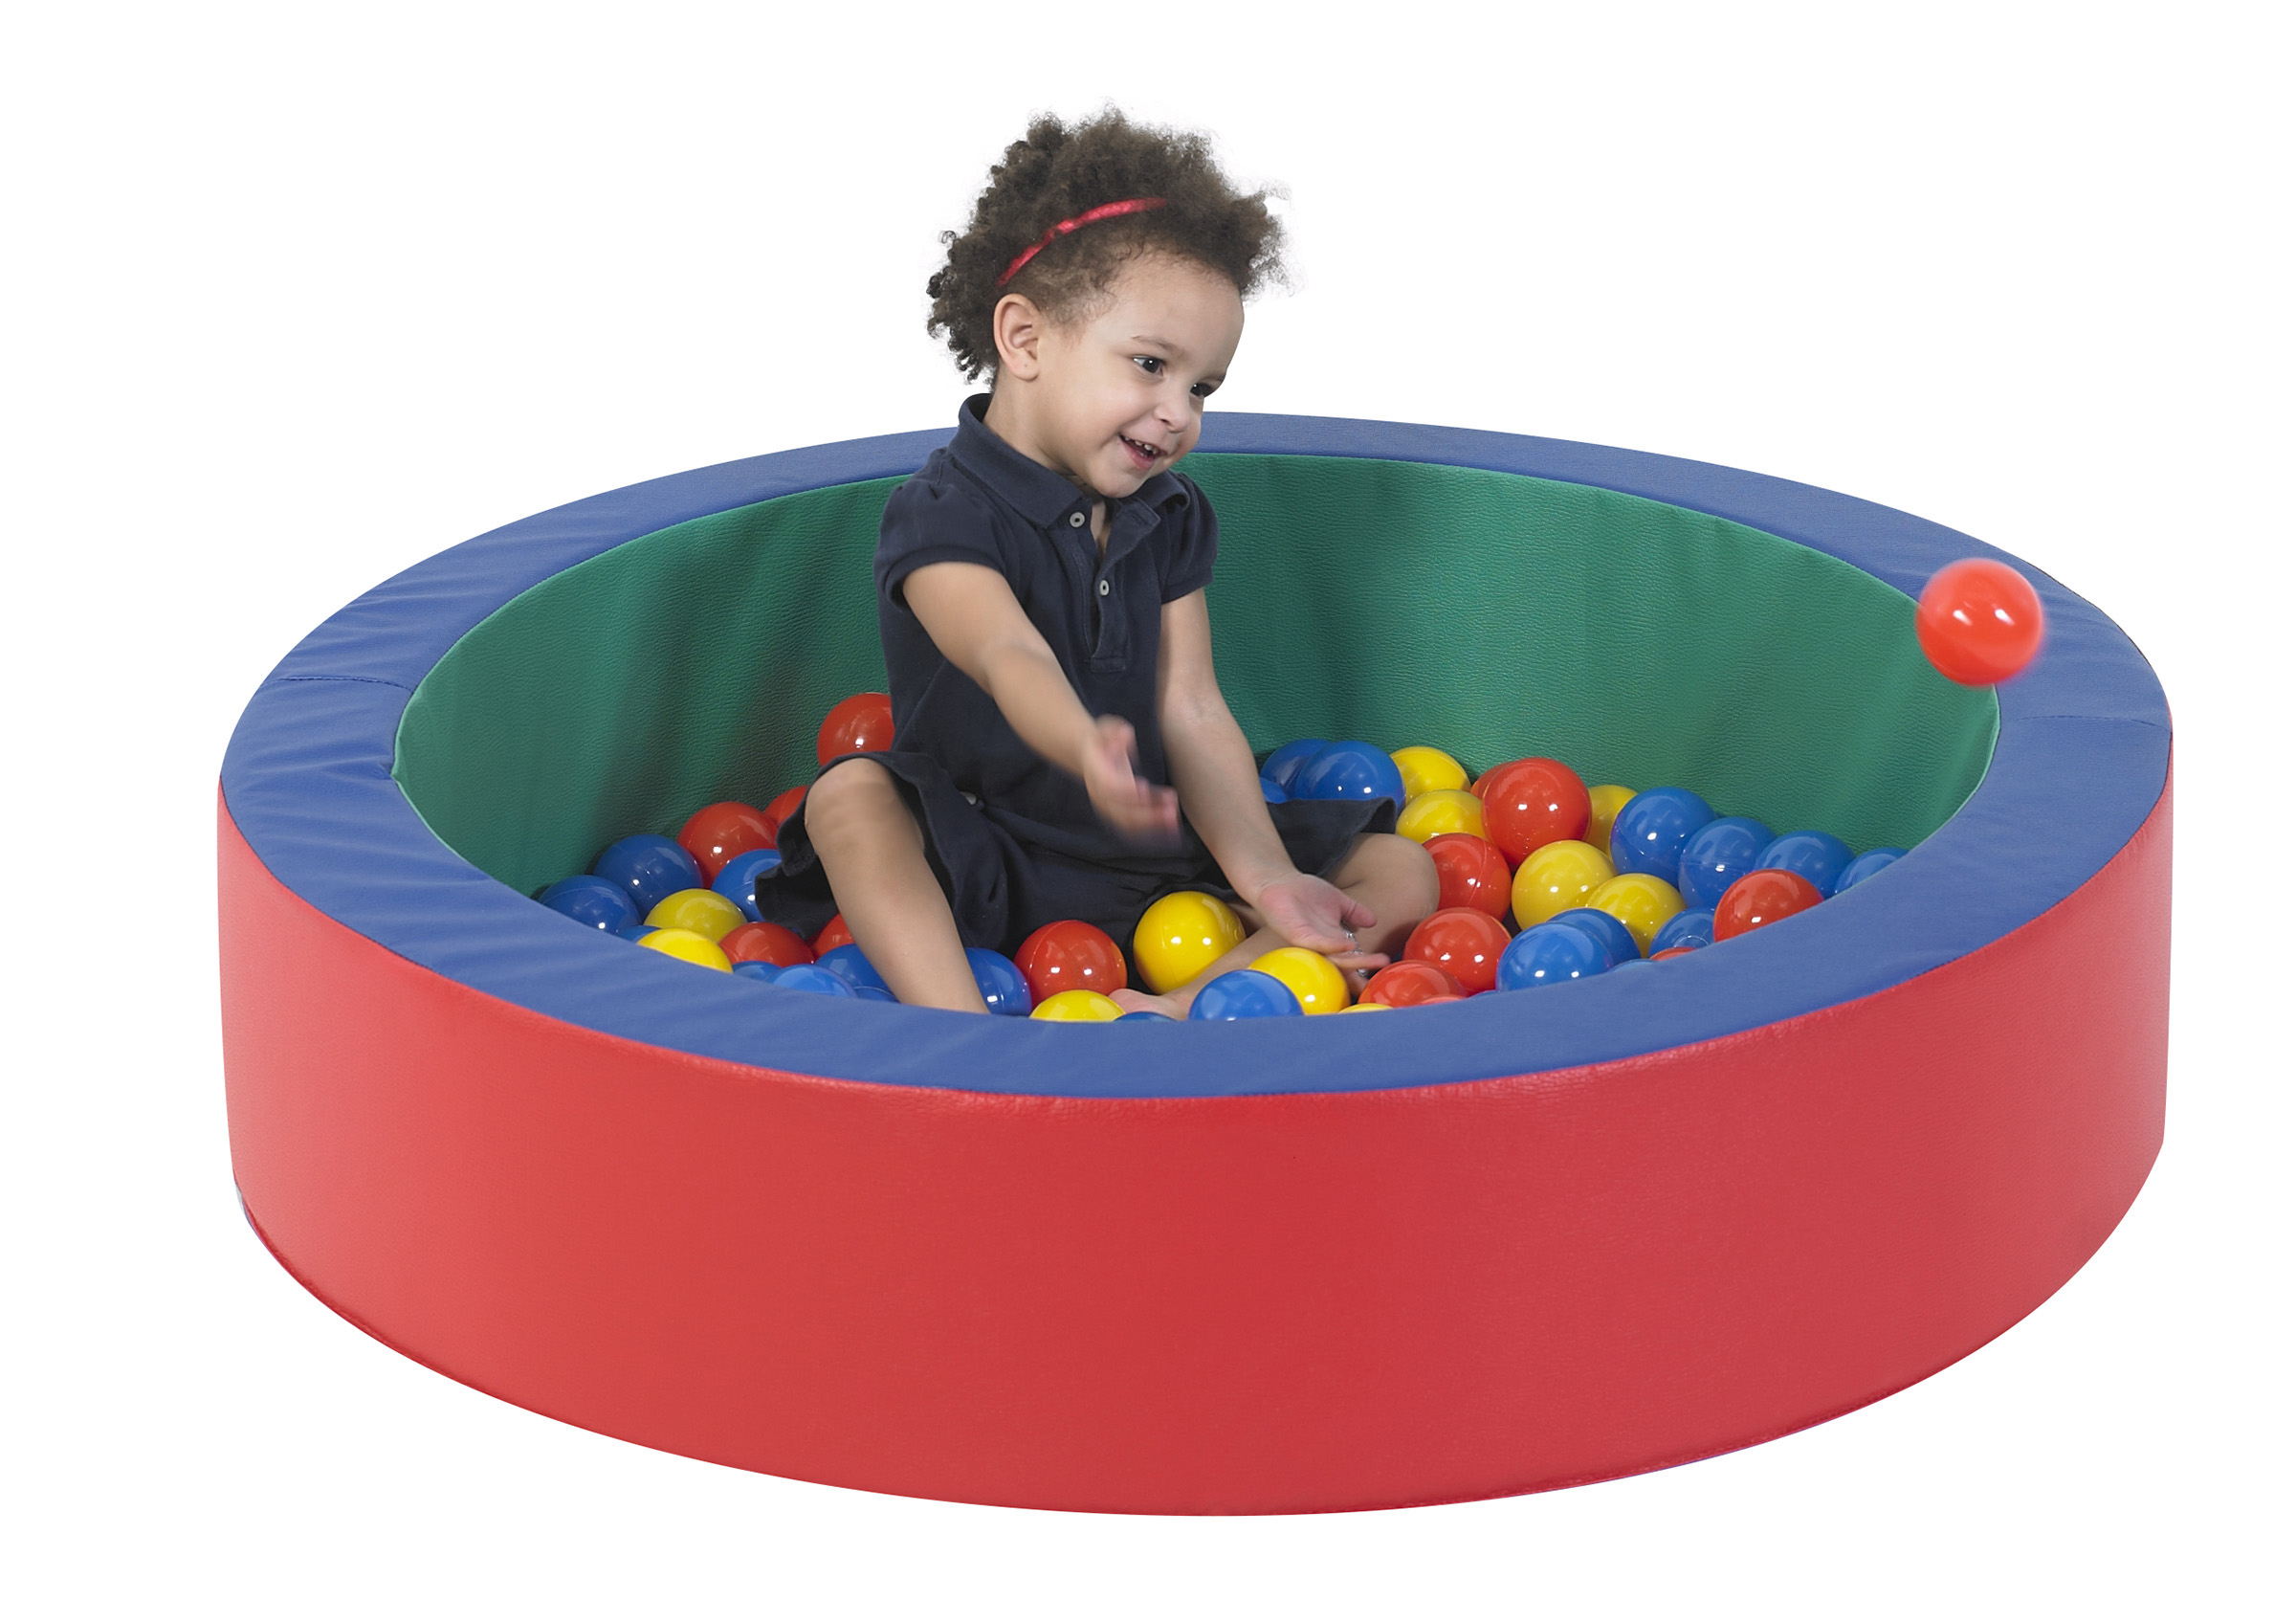 HOT Plastic Balls for Children For Ball Pits Kids Multi Coloured Toys Play Pool 